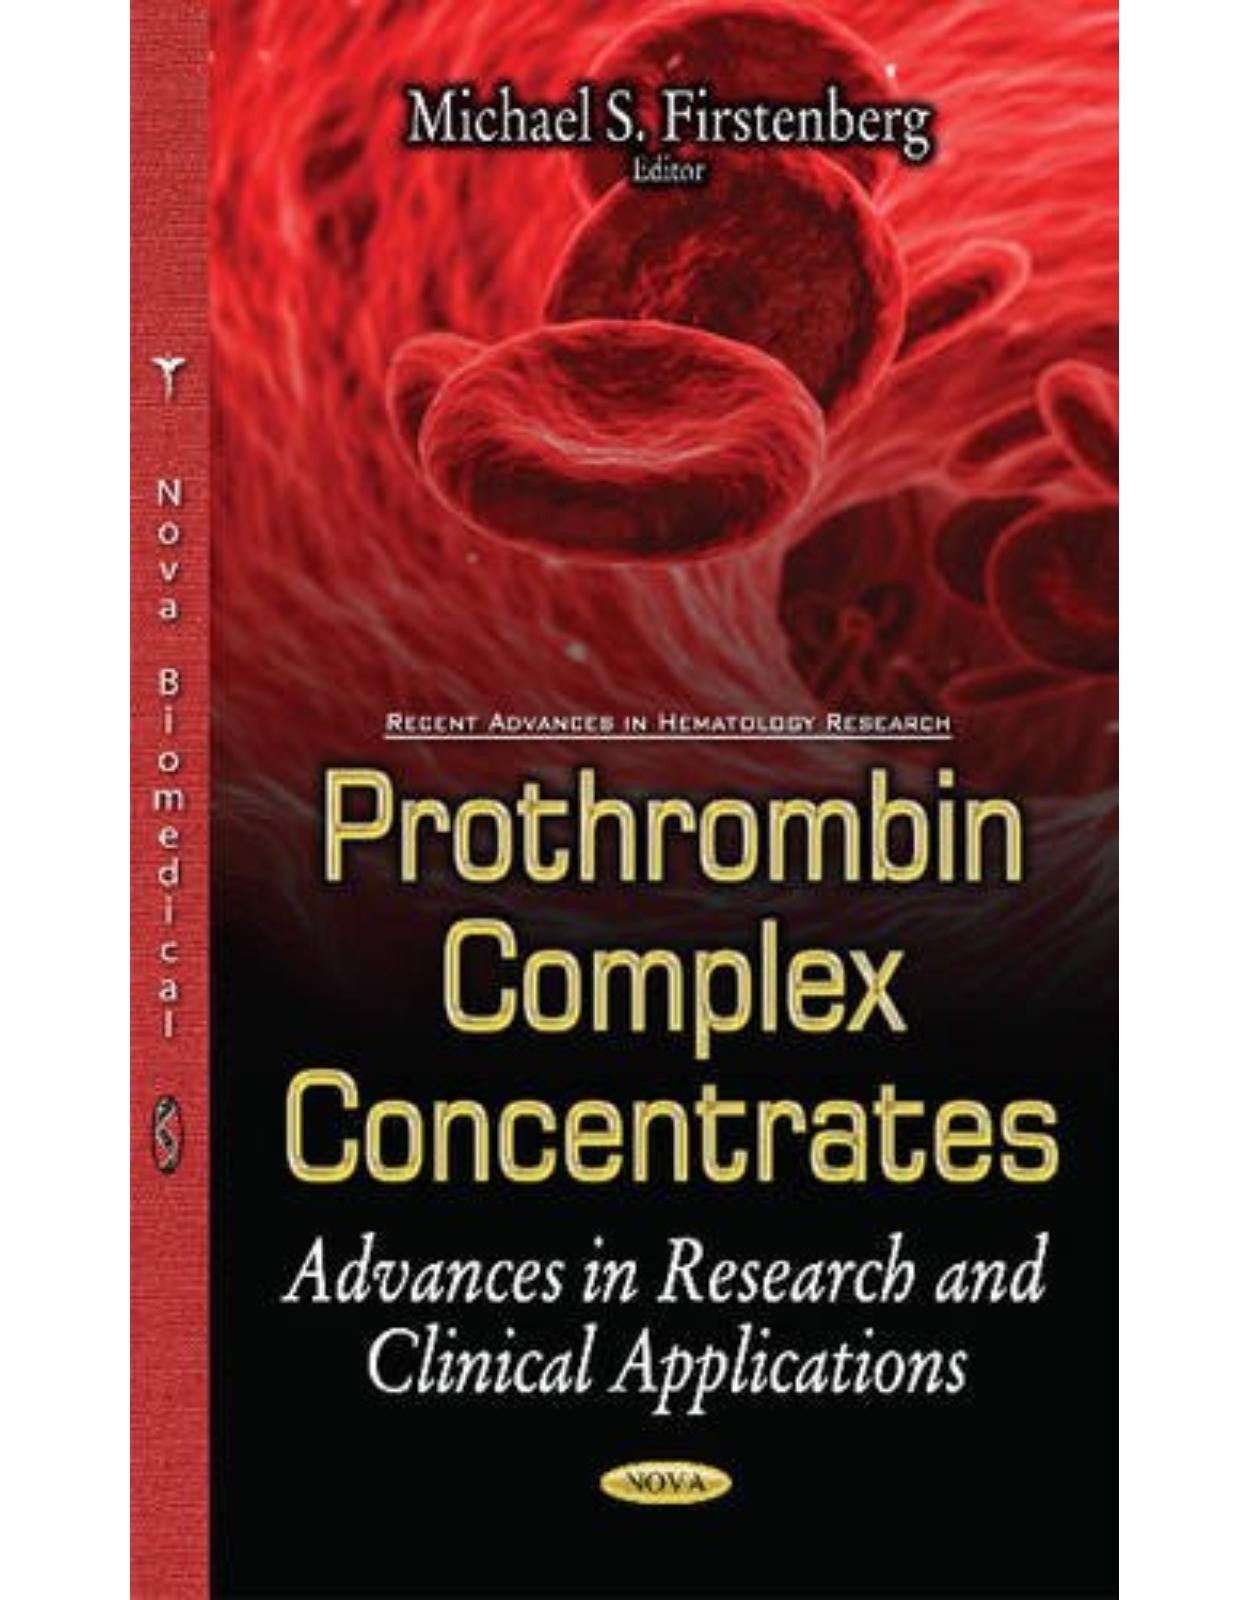 Prothrombin Complex Concentrates: Advances in Research & Clinical Applications